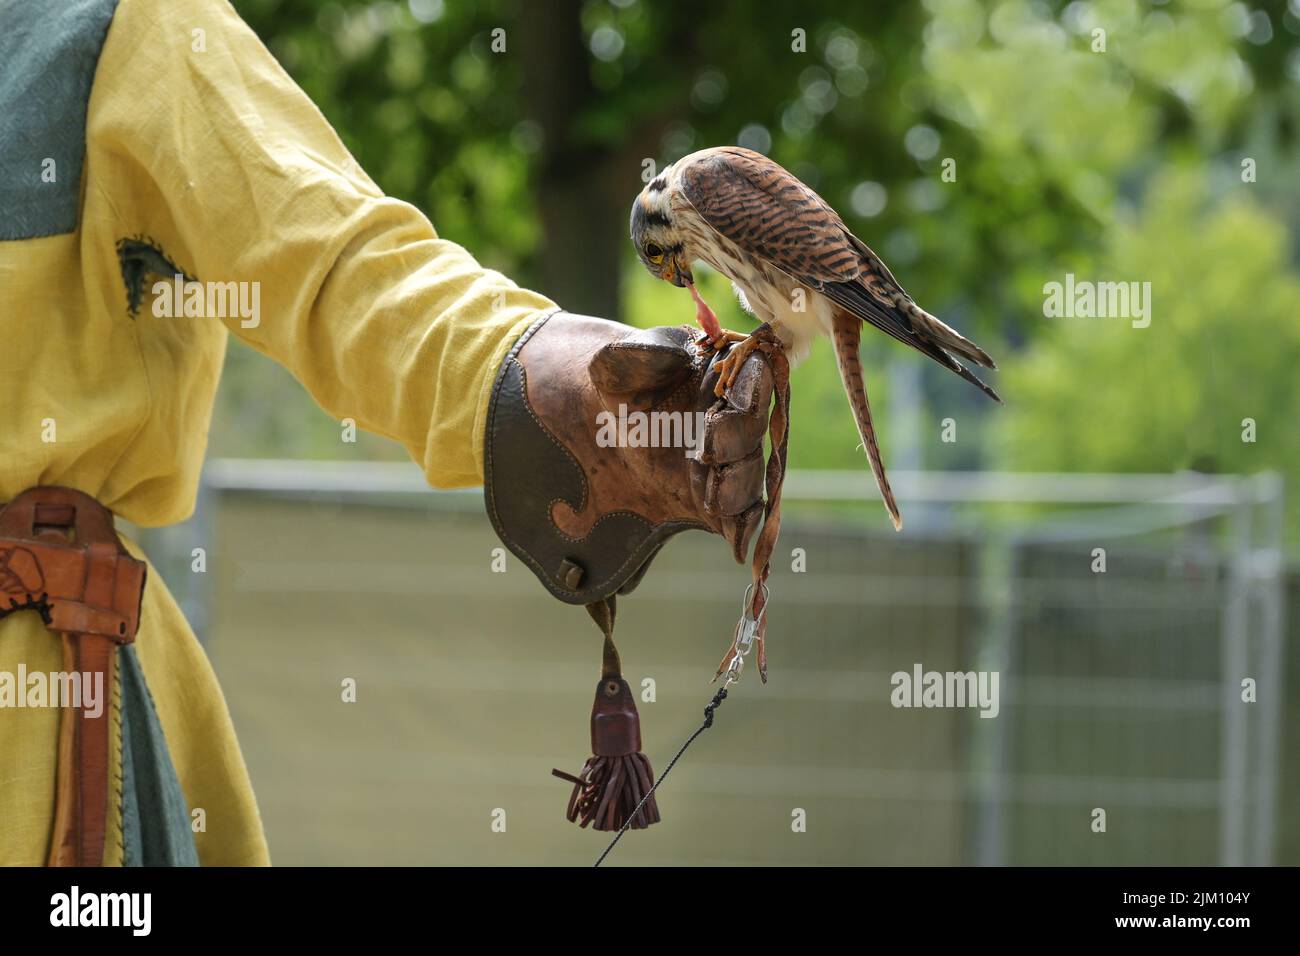 Falcon is fed on the leather glove by a falconer, a small but fast hunting bird during training, copy space, selected focus Stock Photo